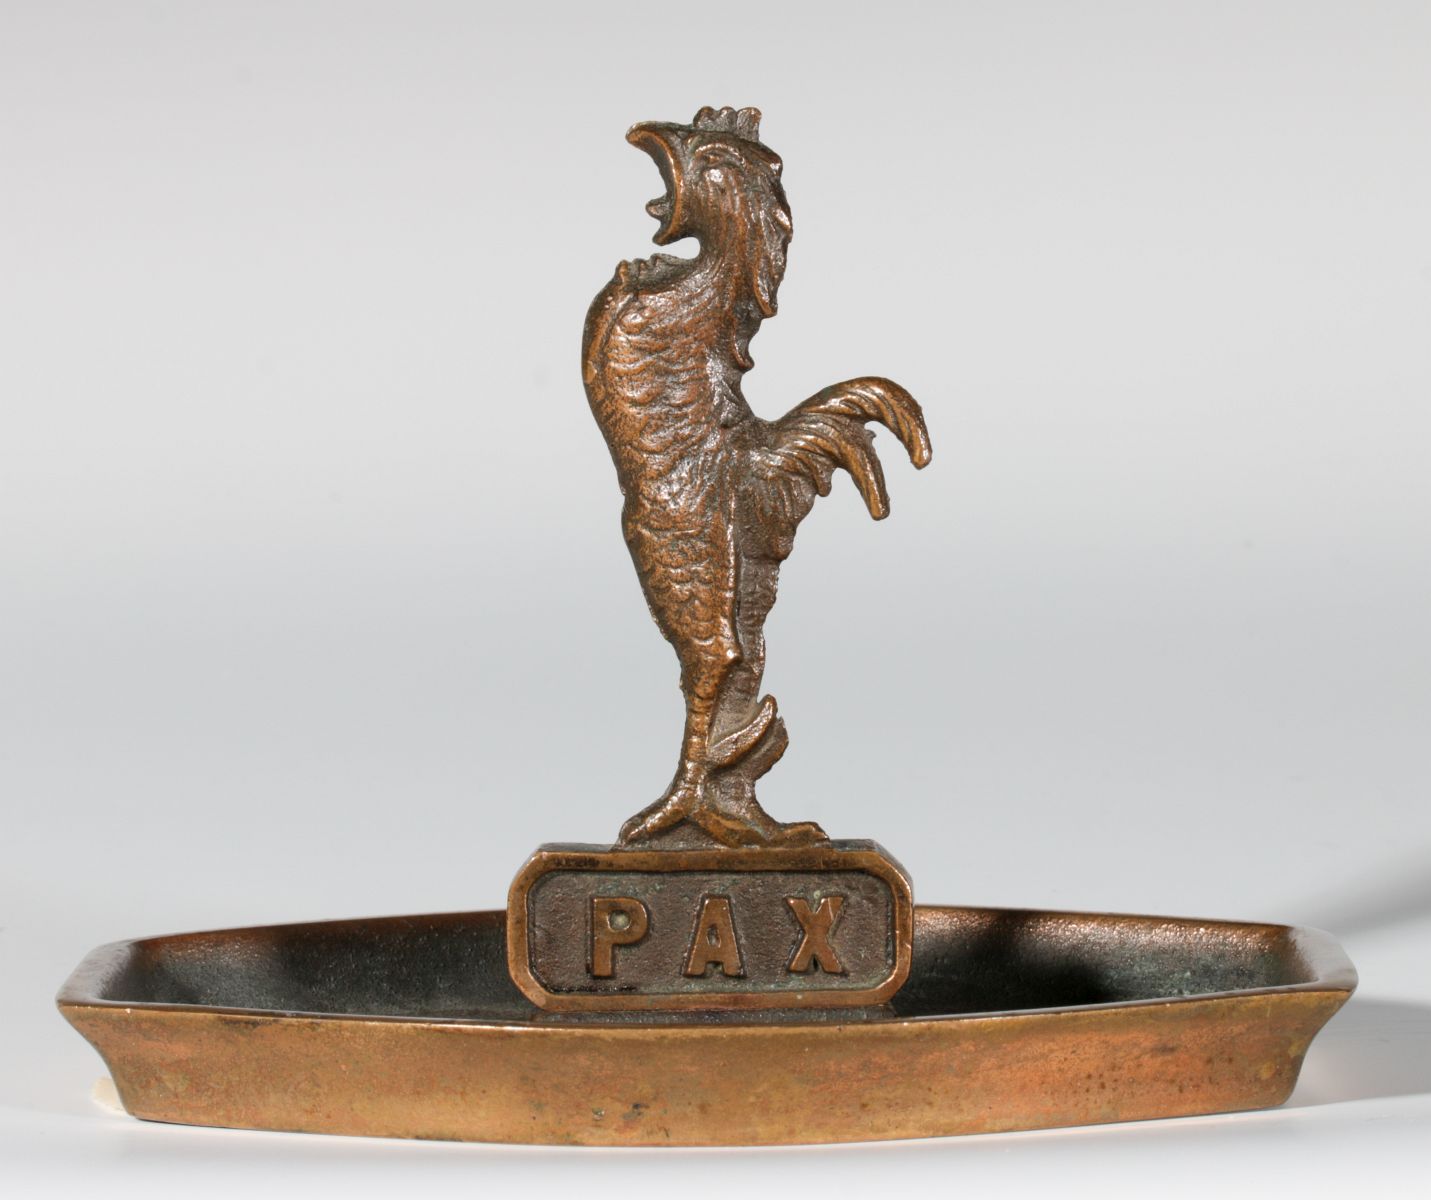 A C. 1900 PAX SOAP ADVERTISING TRAY WITH ROOSTER